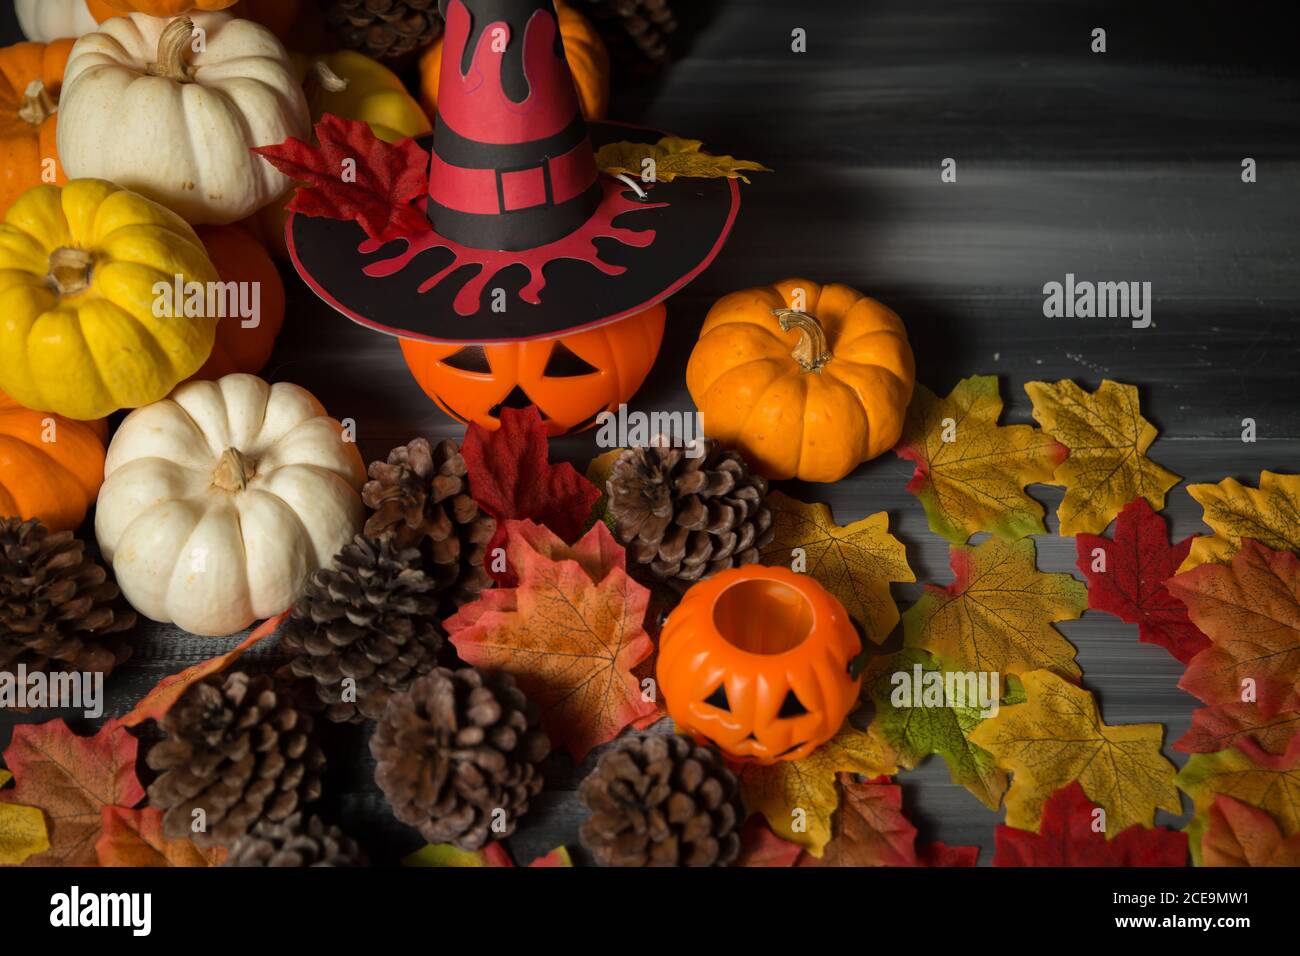 A pumpkin wearing a Halloween witch hat with maple leaves on dark background. Stock Photo